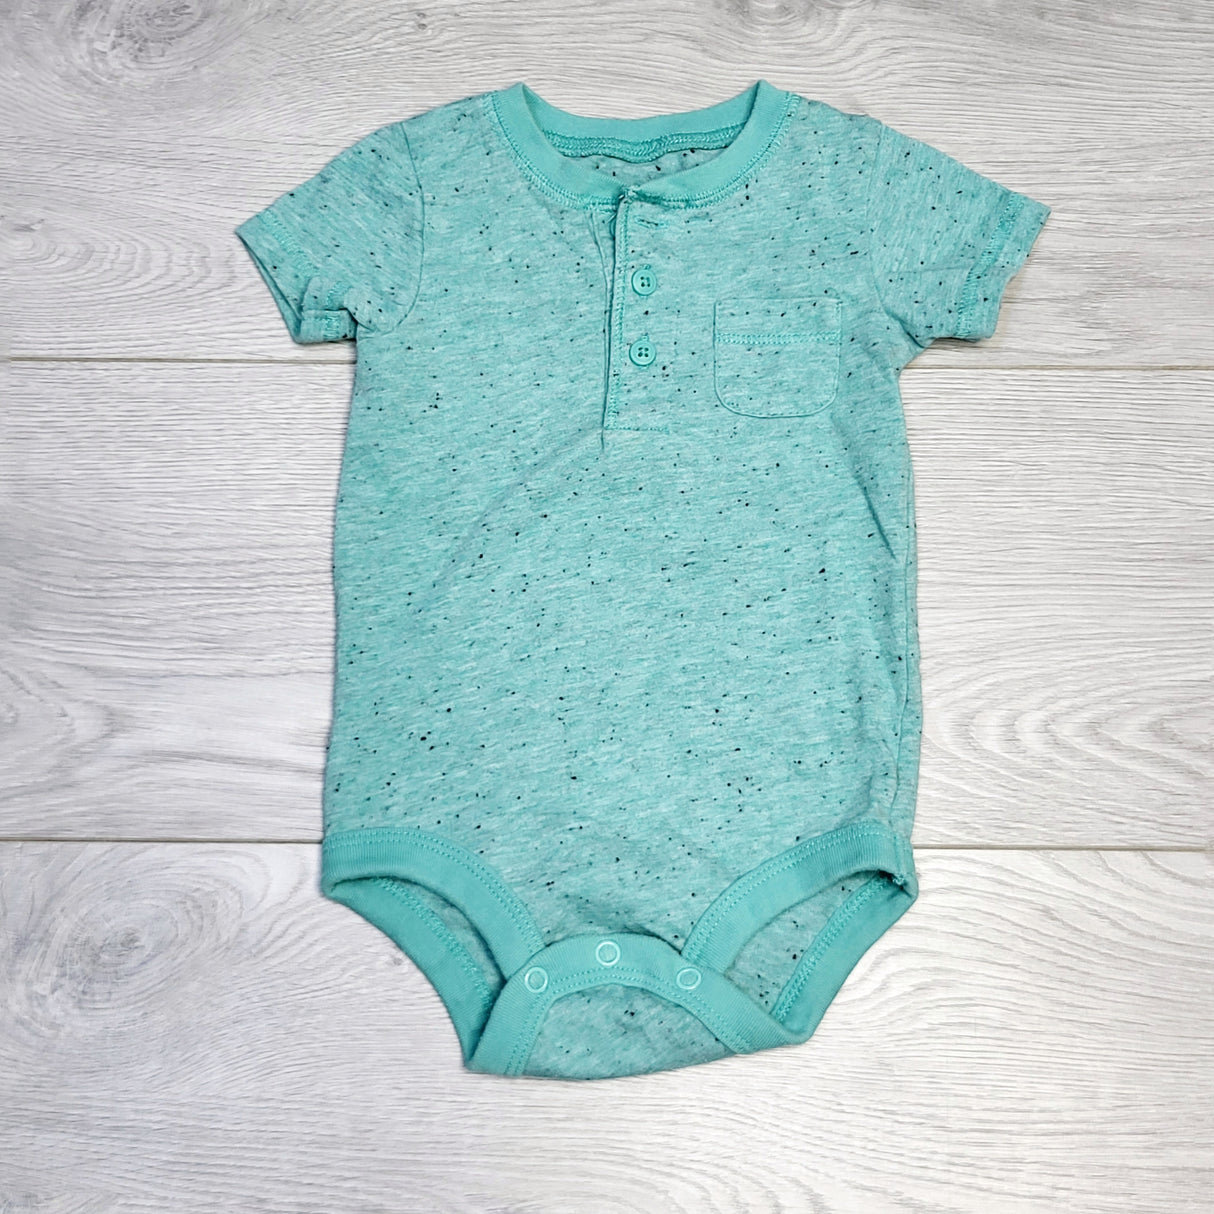 CHOL2 - George turquoise speckled onesie, 3-6 months